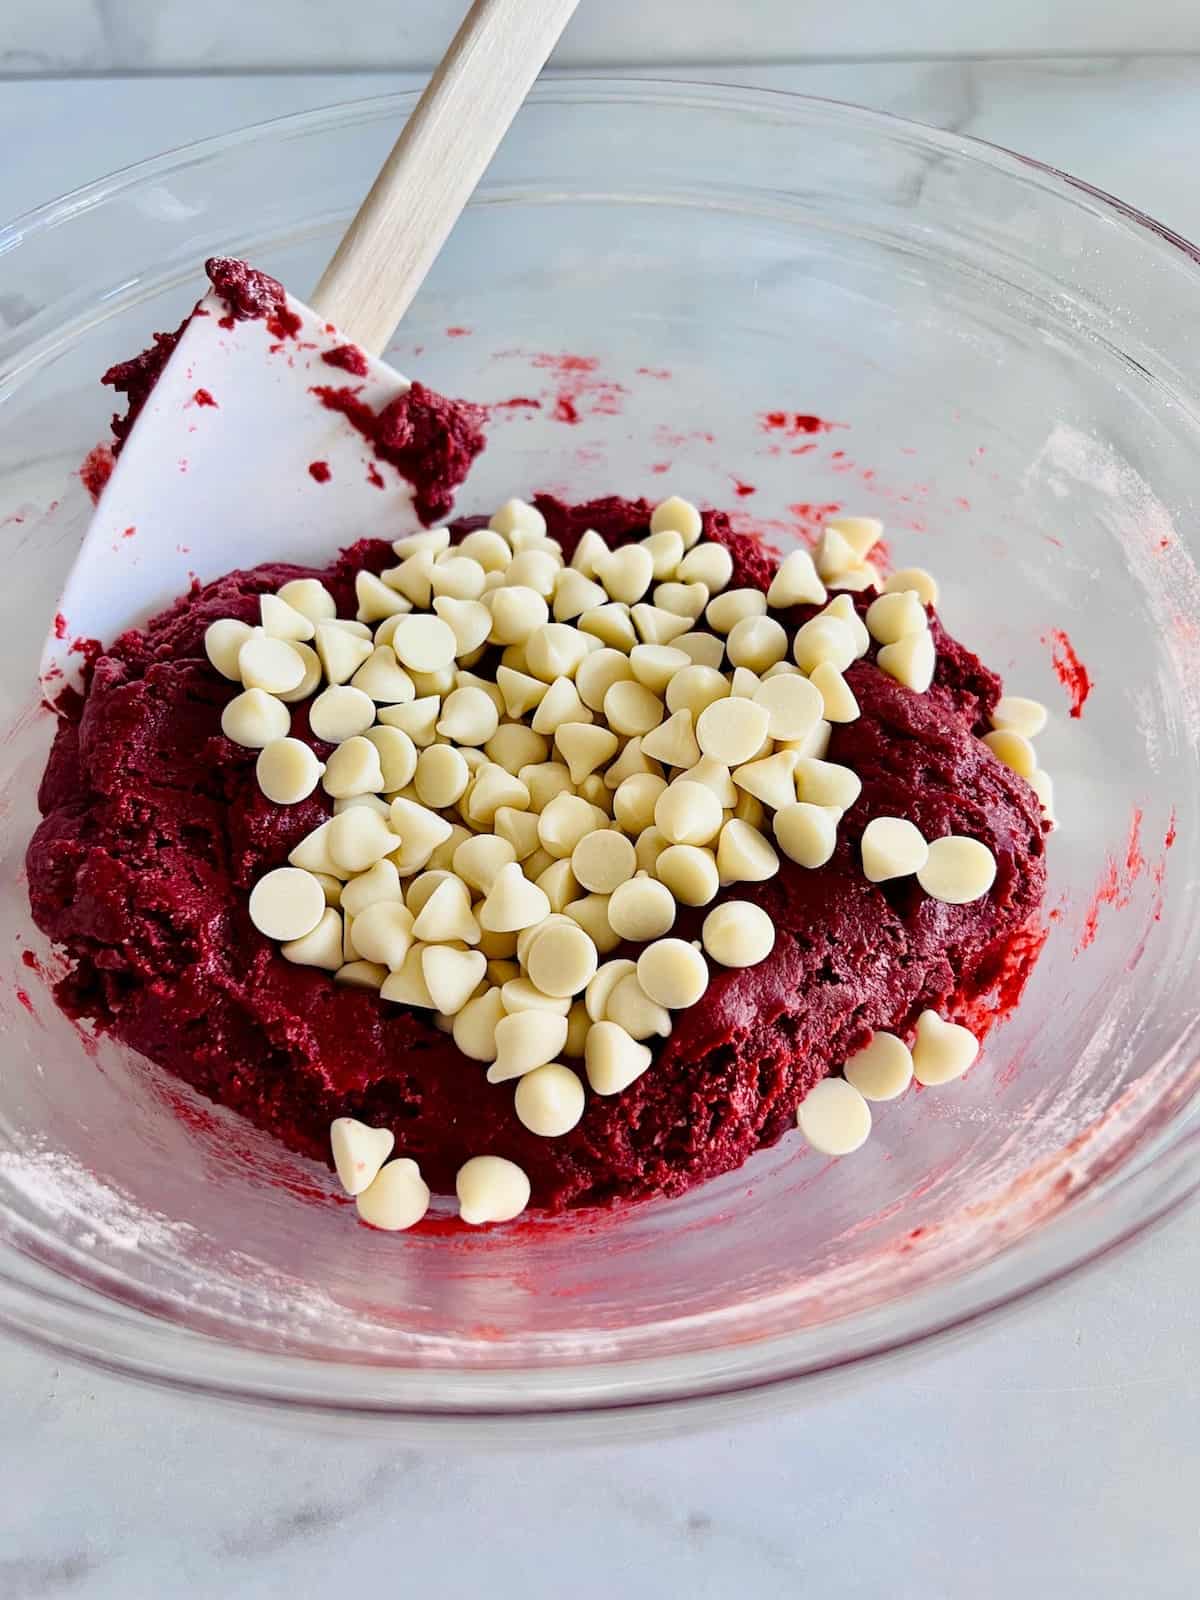 Folding in the white chocolate chips into the red velvet brownie batter.